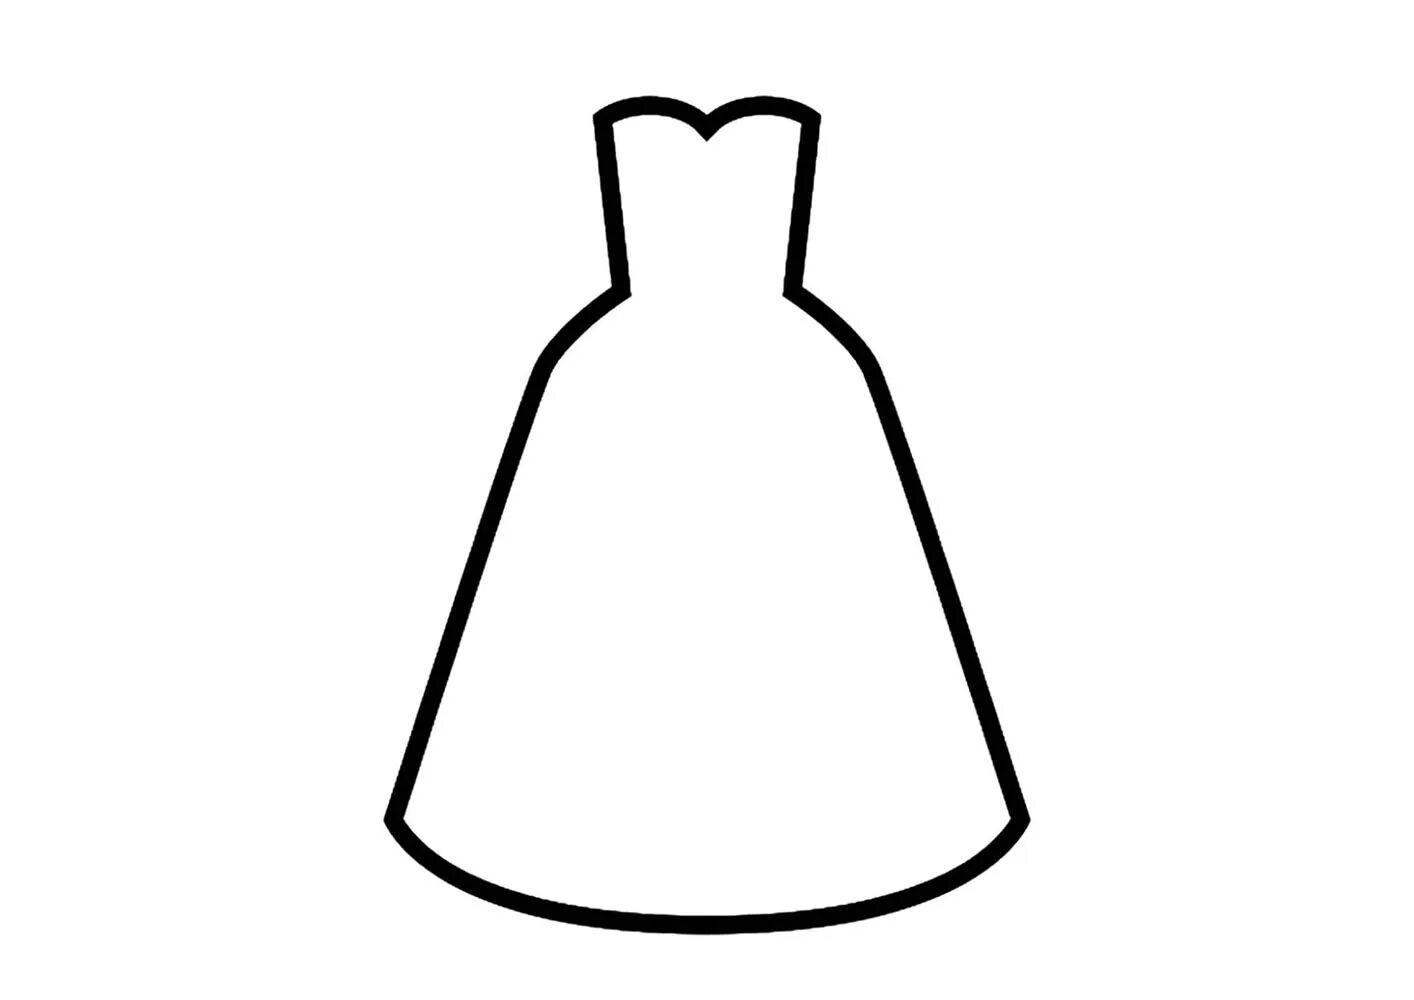 Glamorous dress coloring page for children 2-3 years old